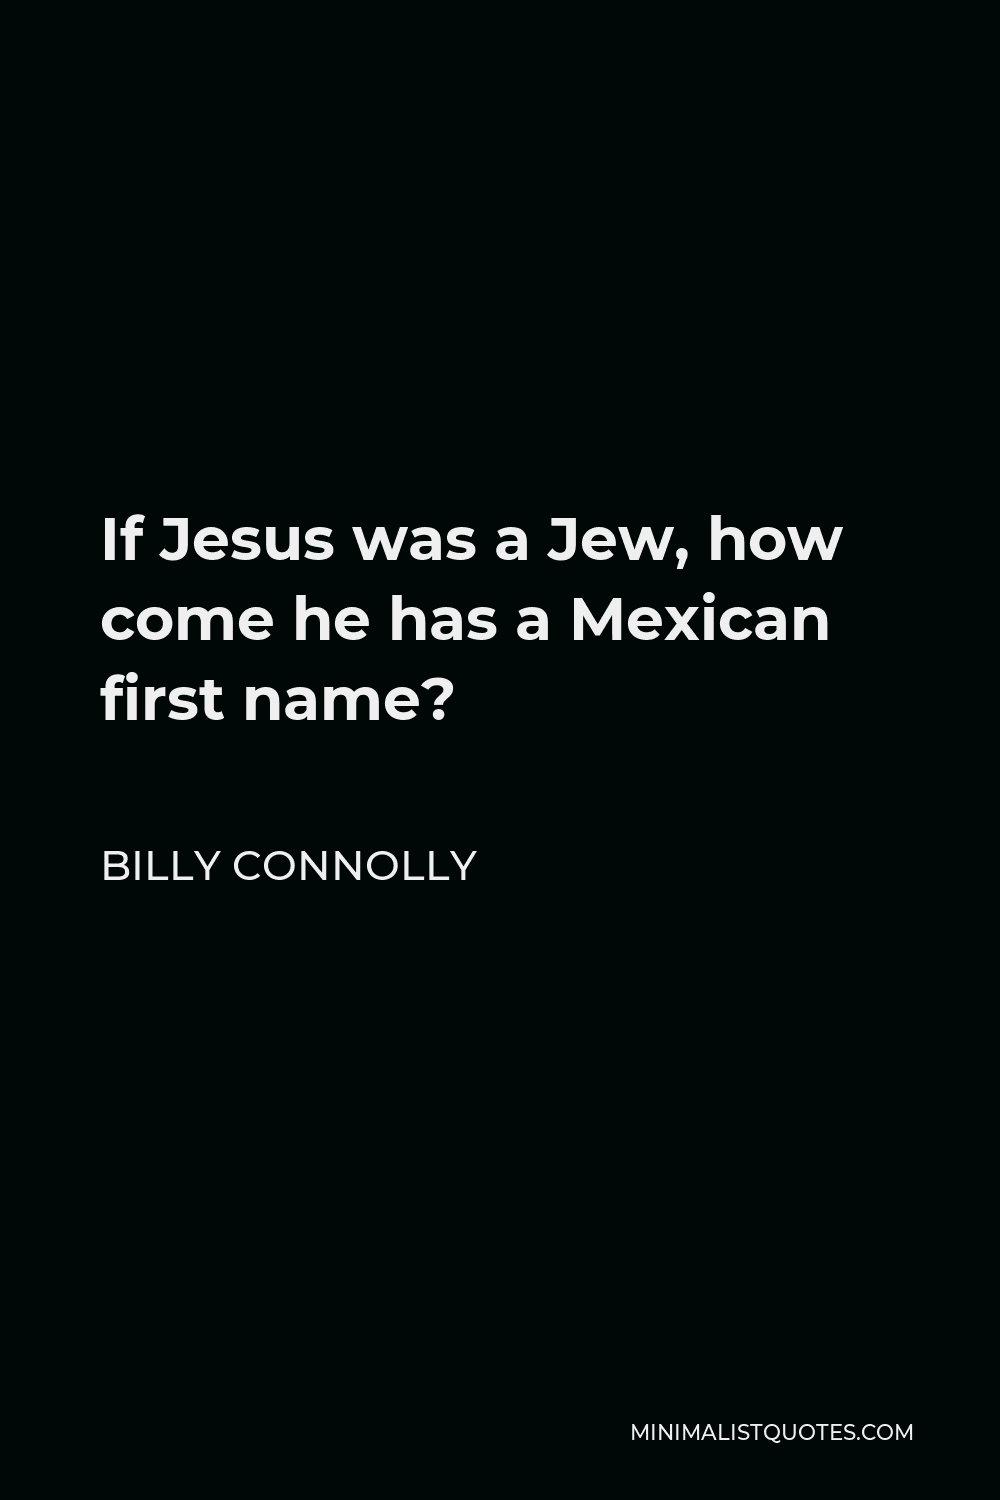 Billy Connolly Quote - If Jesus was a Jew, how come he has a Mexican first name?